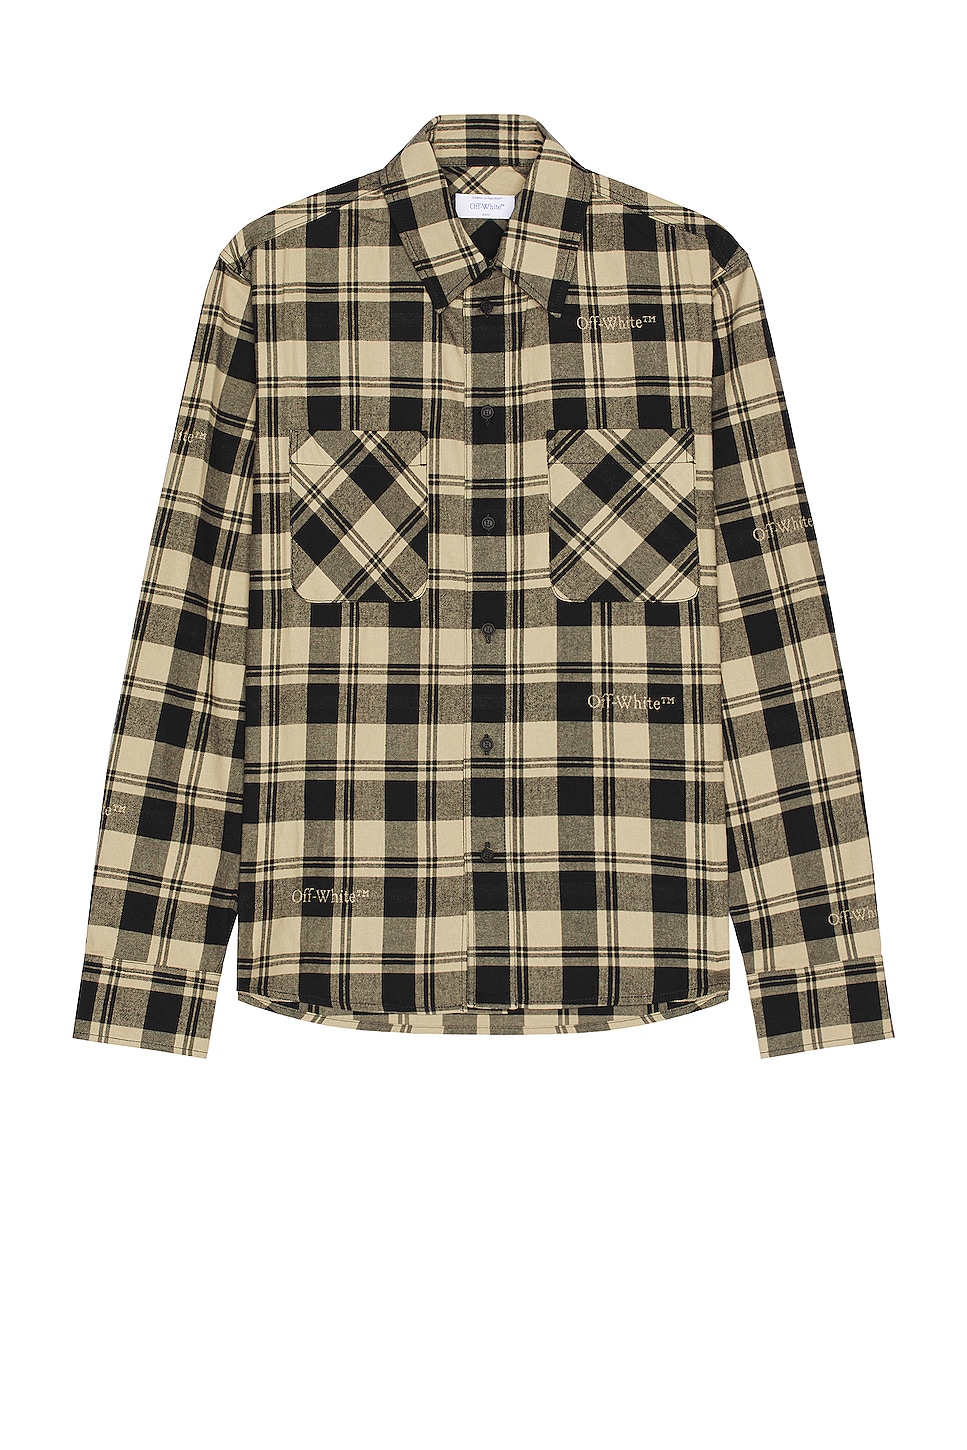 Image 1 of OFF-WHITE Check Flannel Shirt in Black